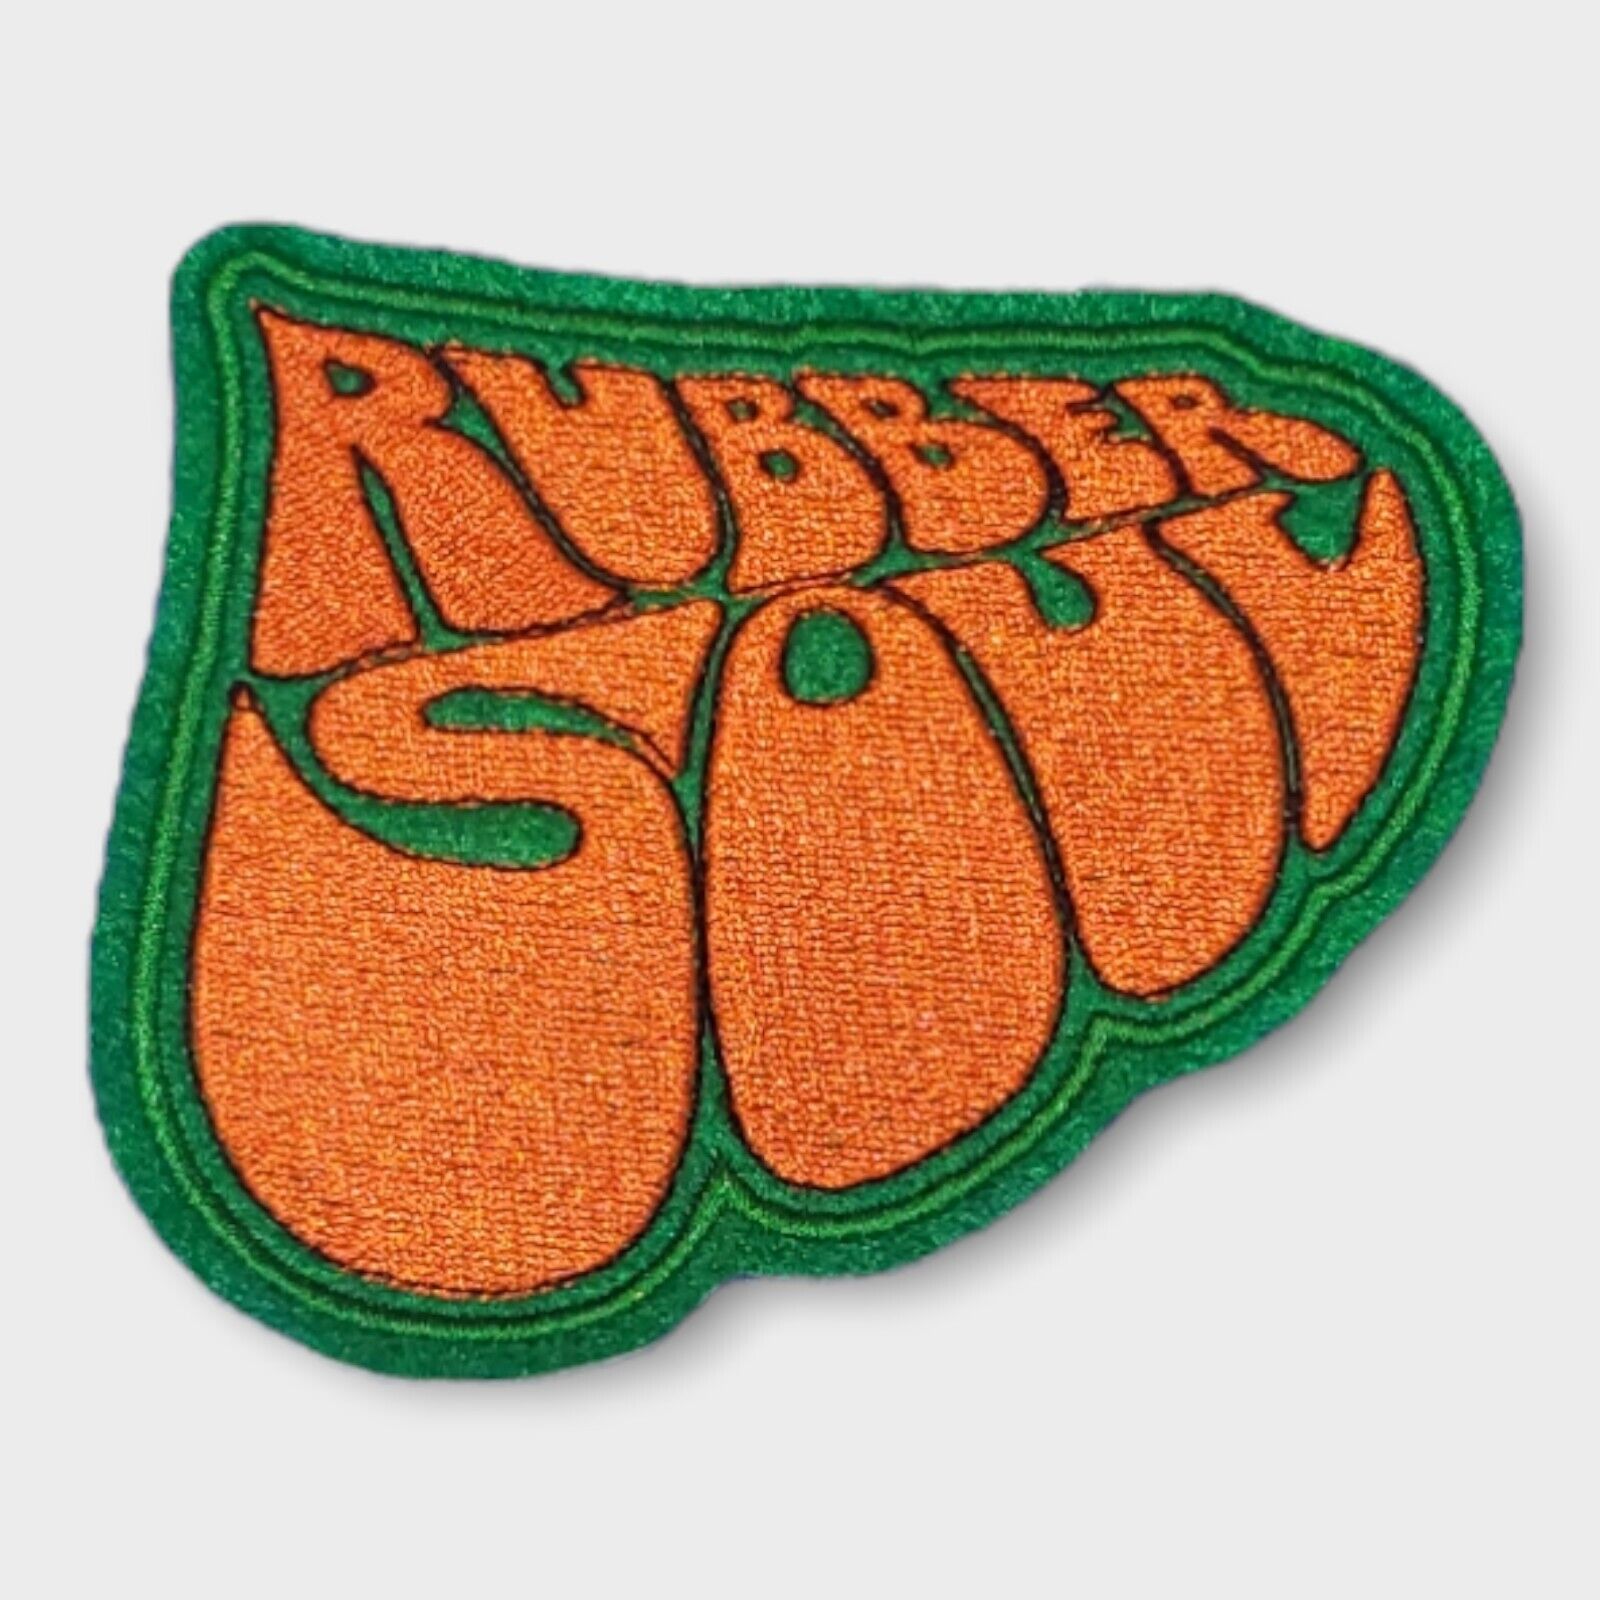 Rubber Soul The Beatles Embroidered Felt Patch